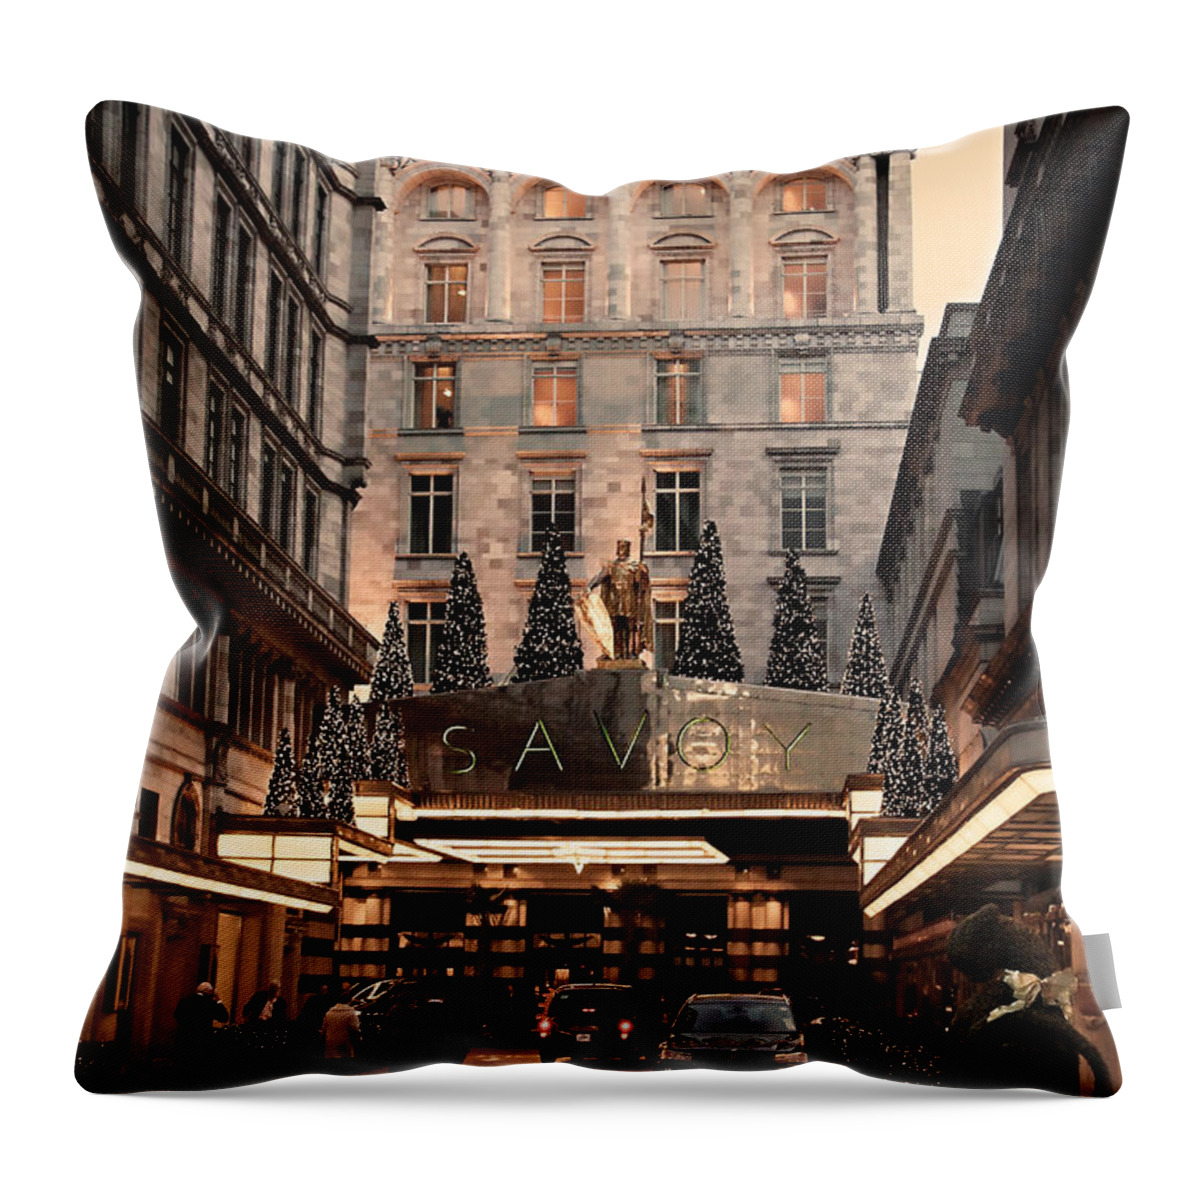 Savoy Throw Pillow featuring the photograph London Scene 3 by Jasna Buncic